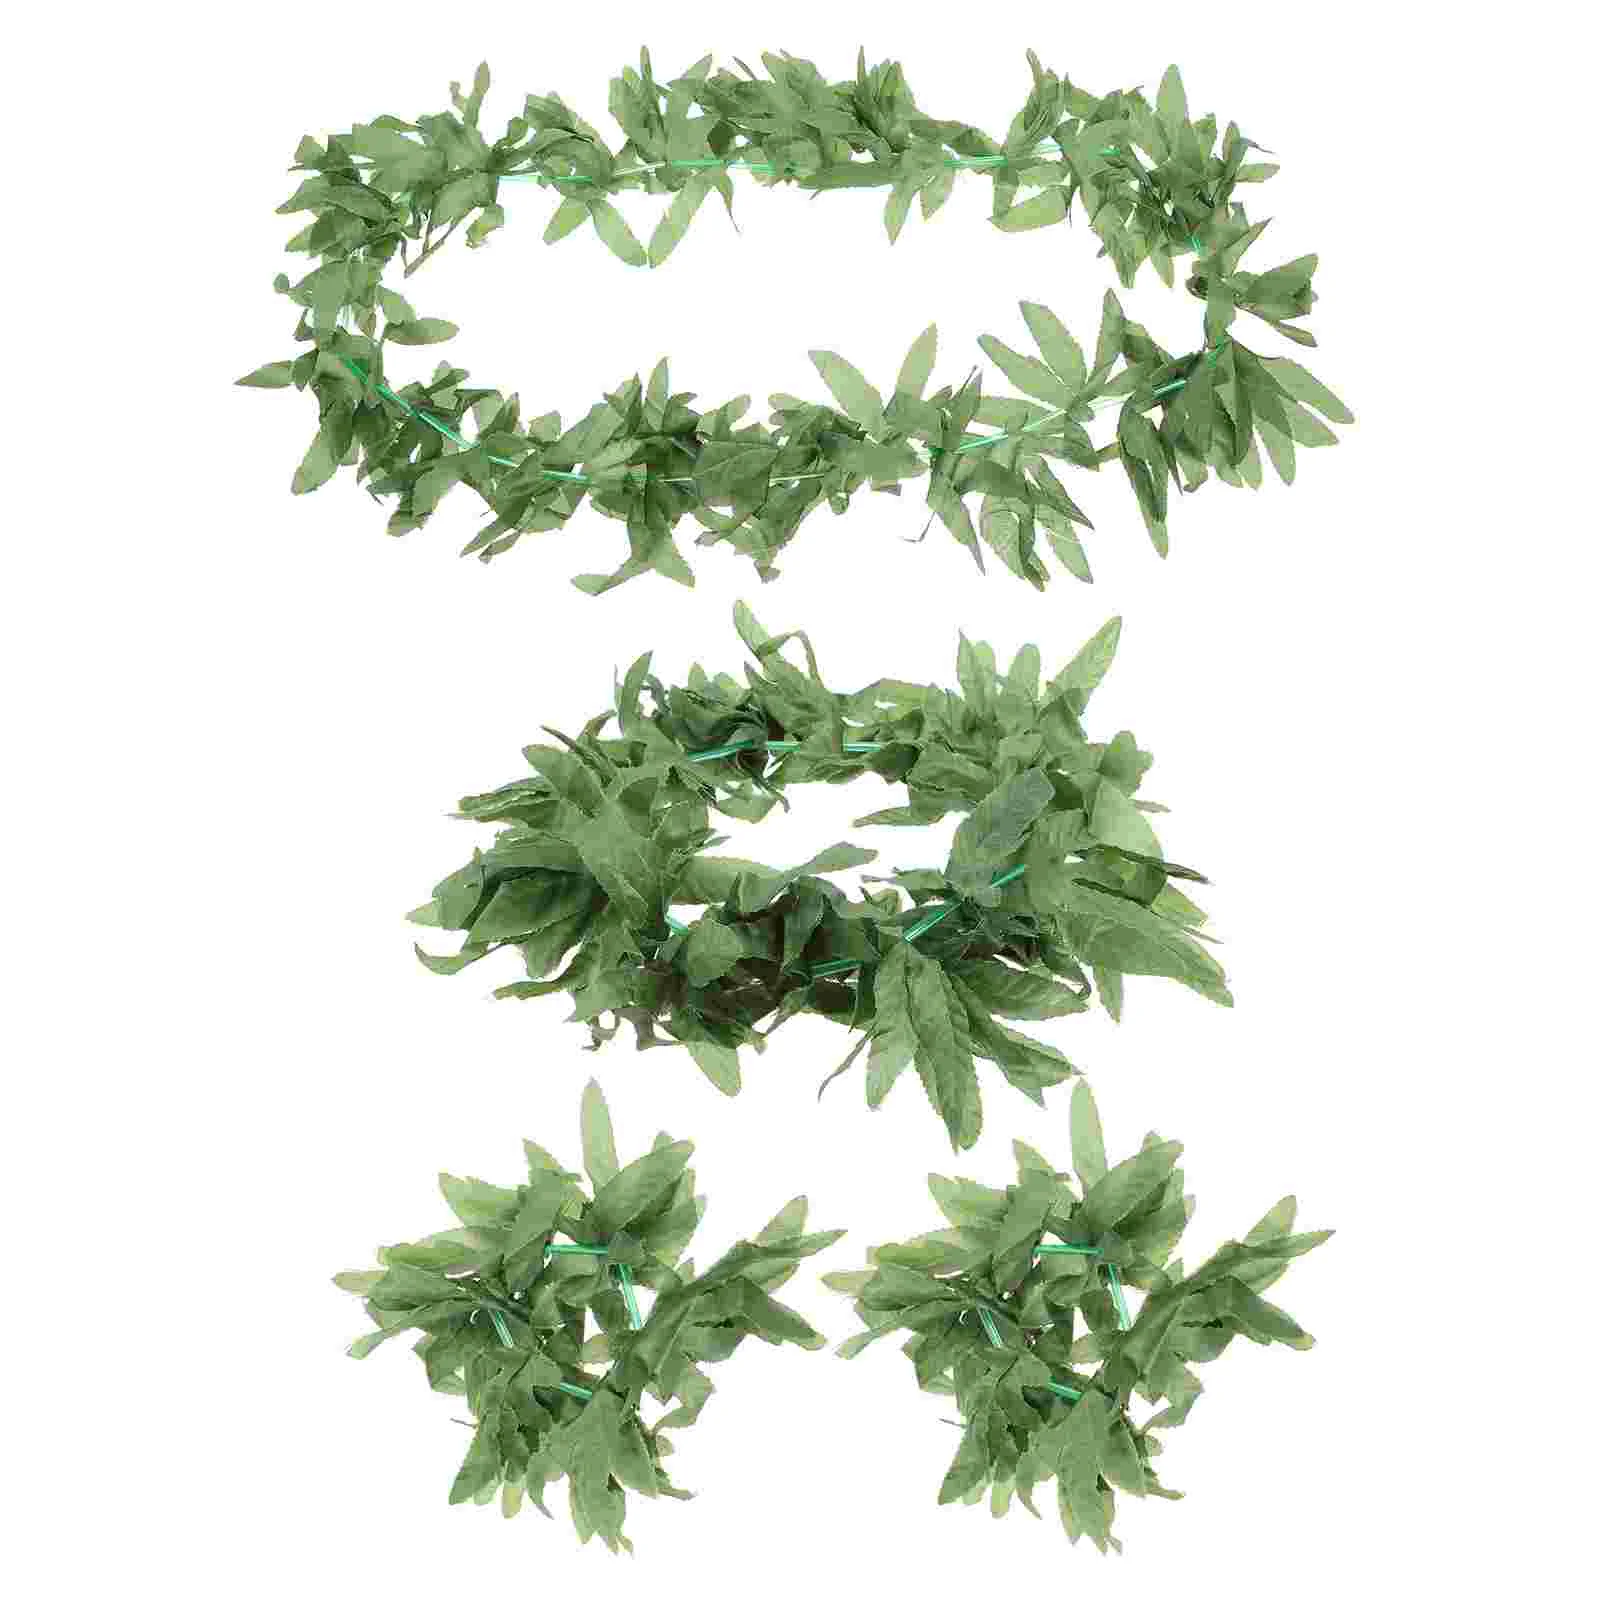 

Wreaths Wreath Tropical Holiday Party Luau Favors Outdoor Artificial Ornament Front Door Summer Necklace Leis Hawaiian Hawaii